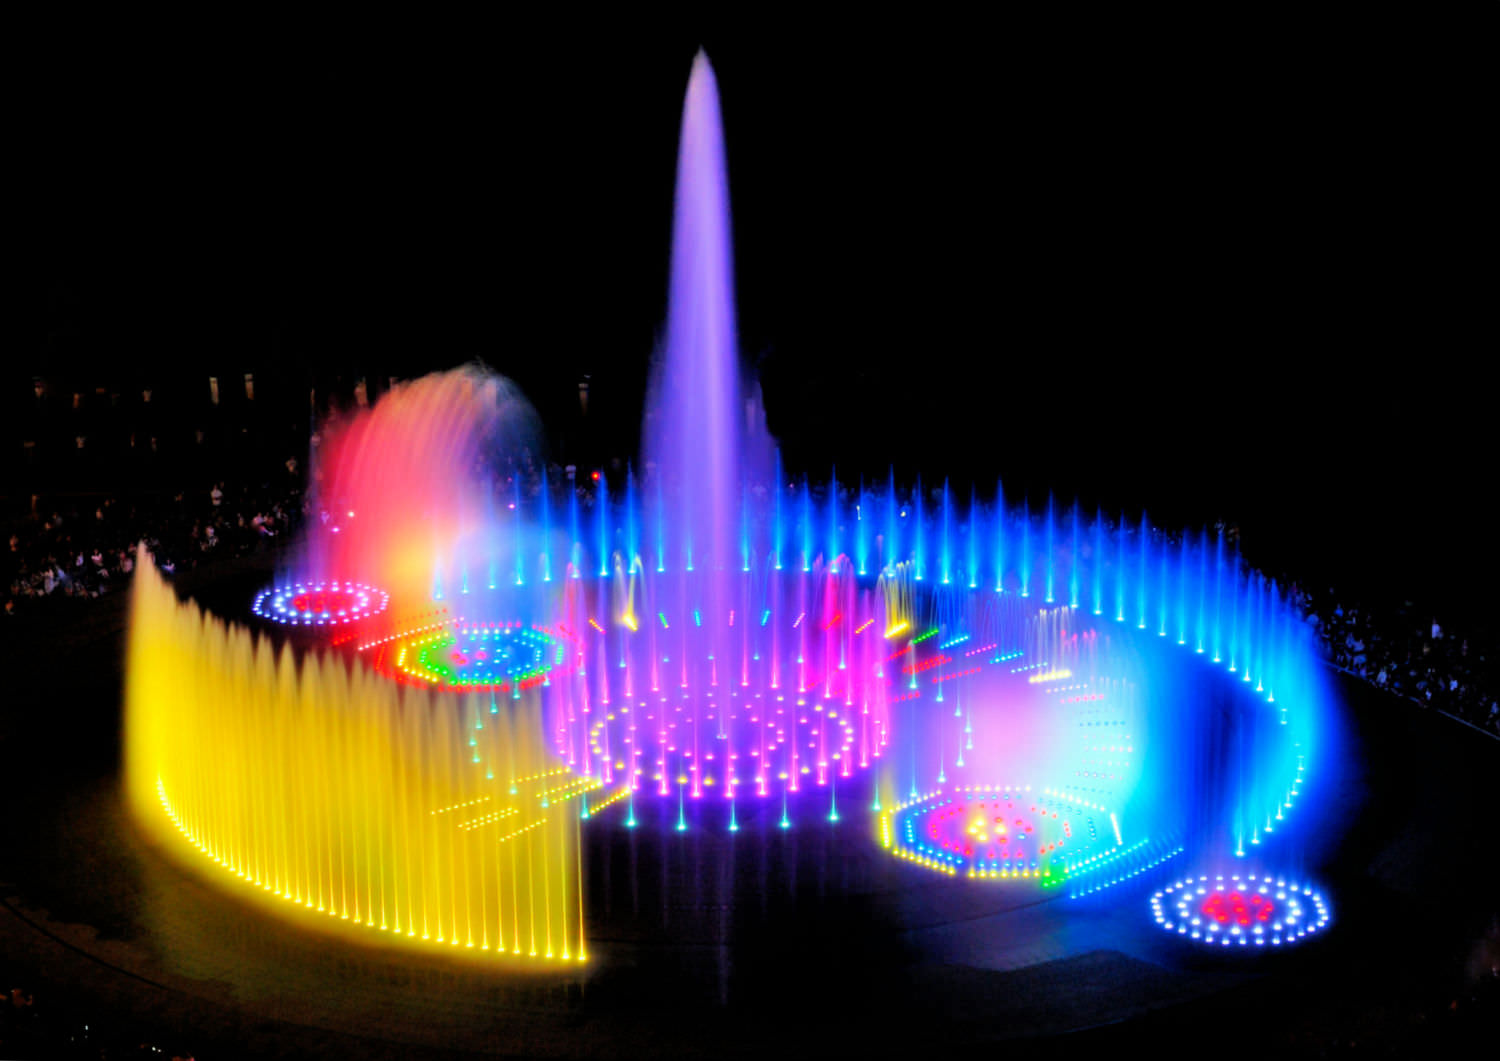 Dadaepo Sunset Fountain in Busan is recorded on the Guinness Book as the largest fountain that shoots up to 55 meters high. It dances along with music & lights.